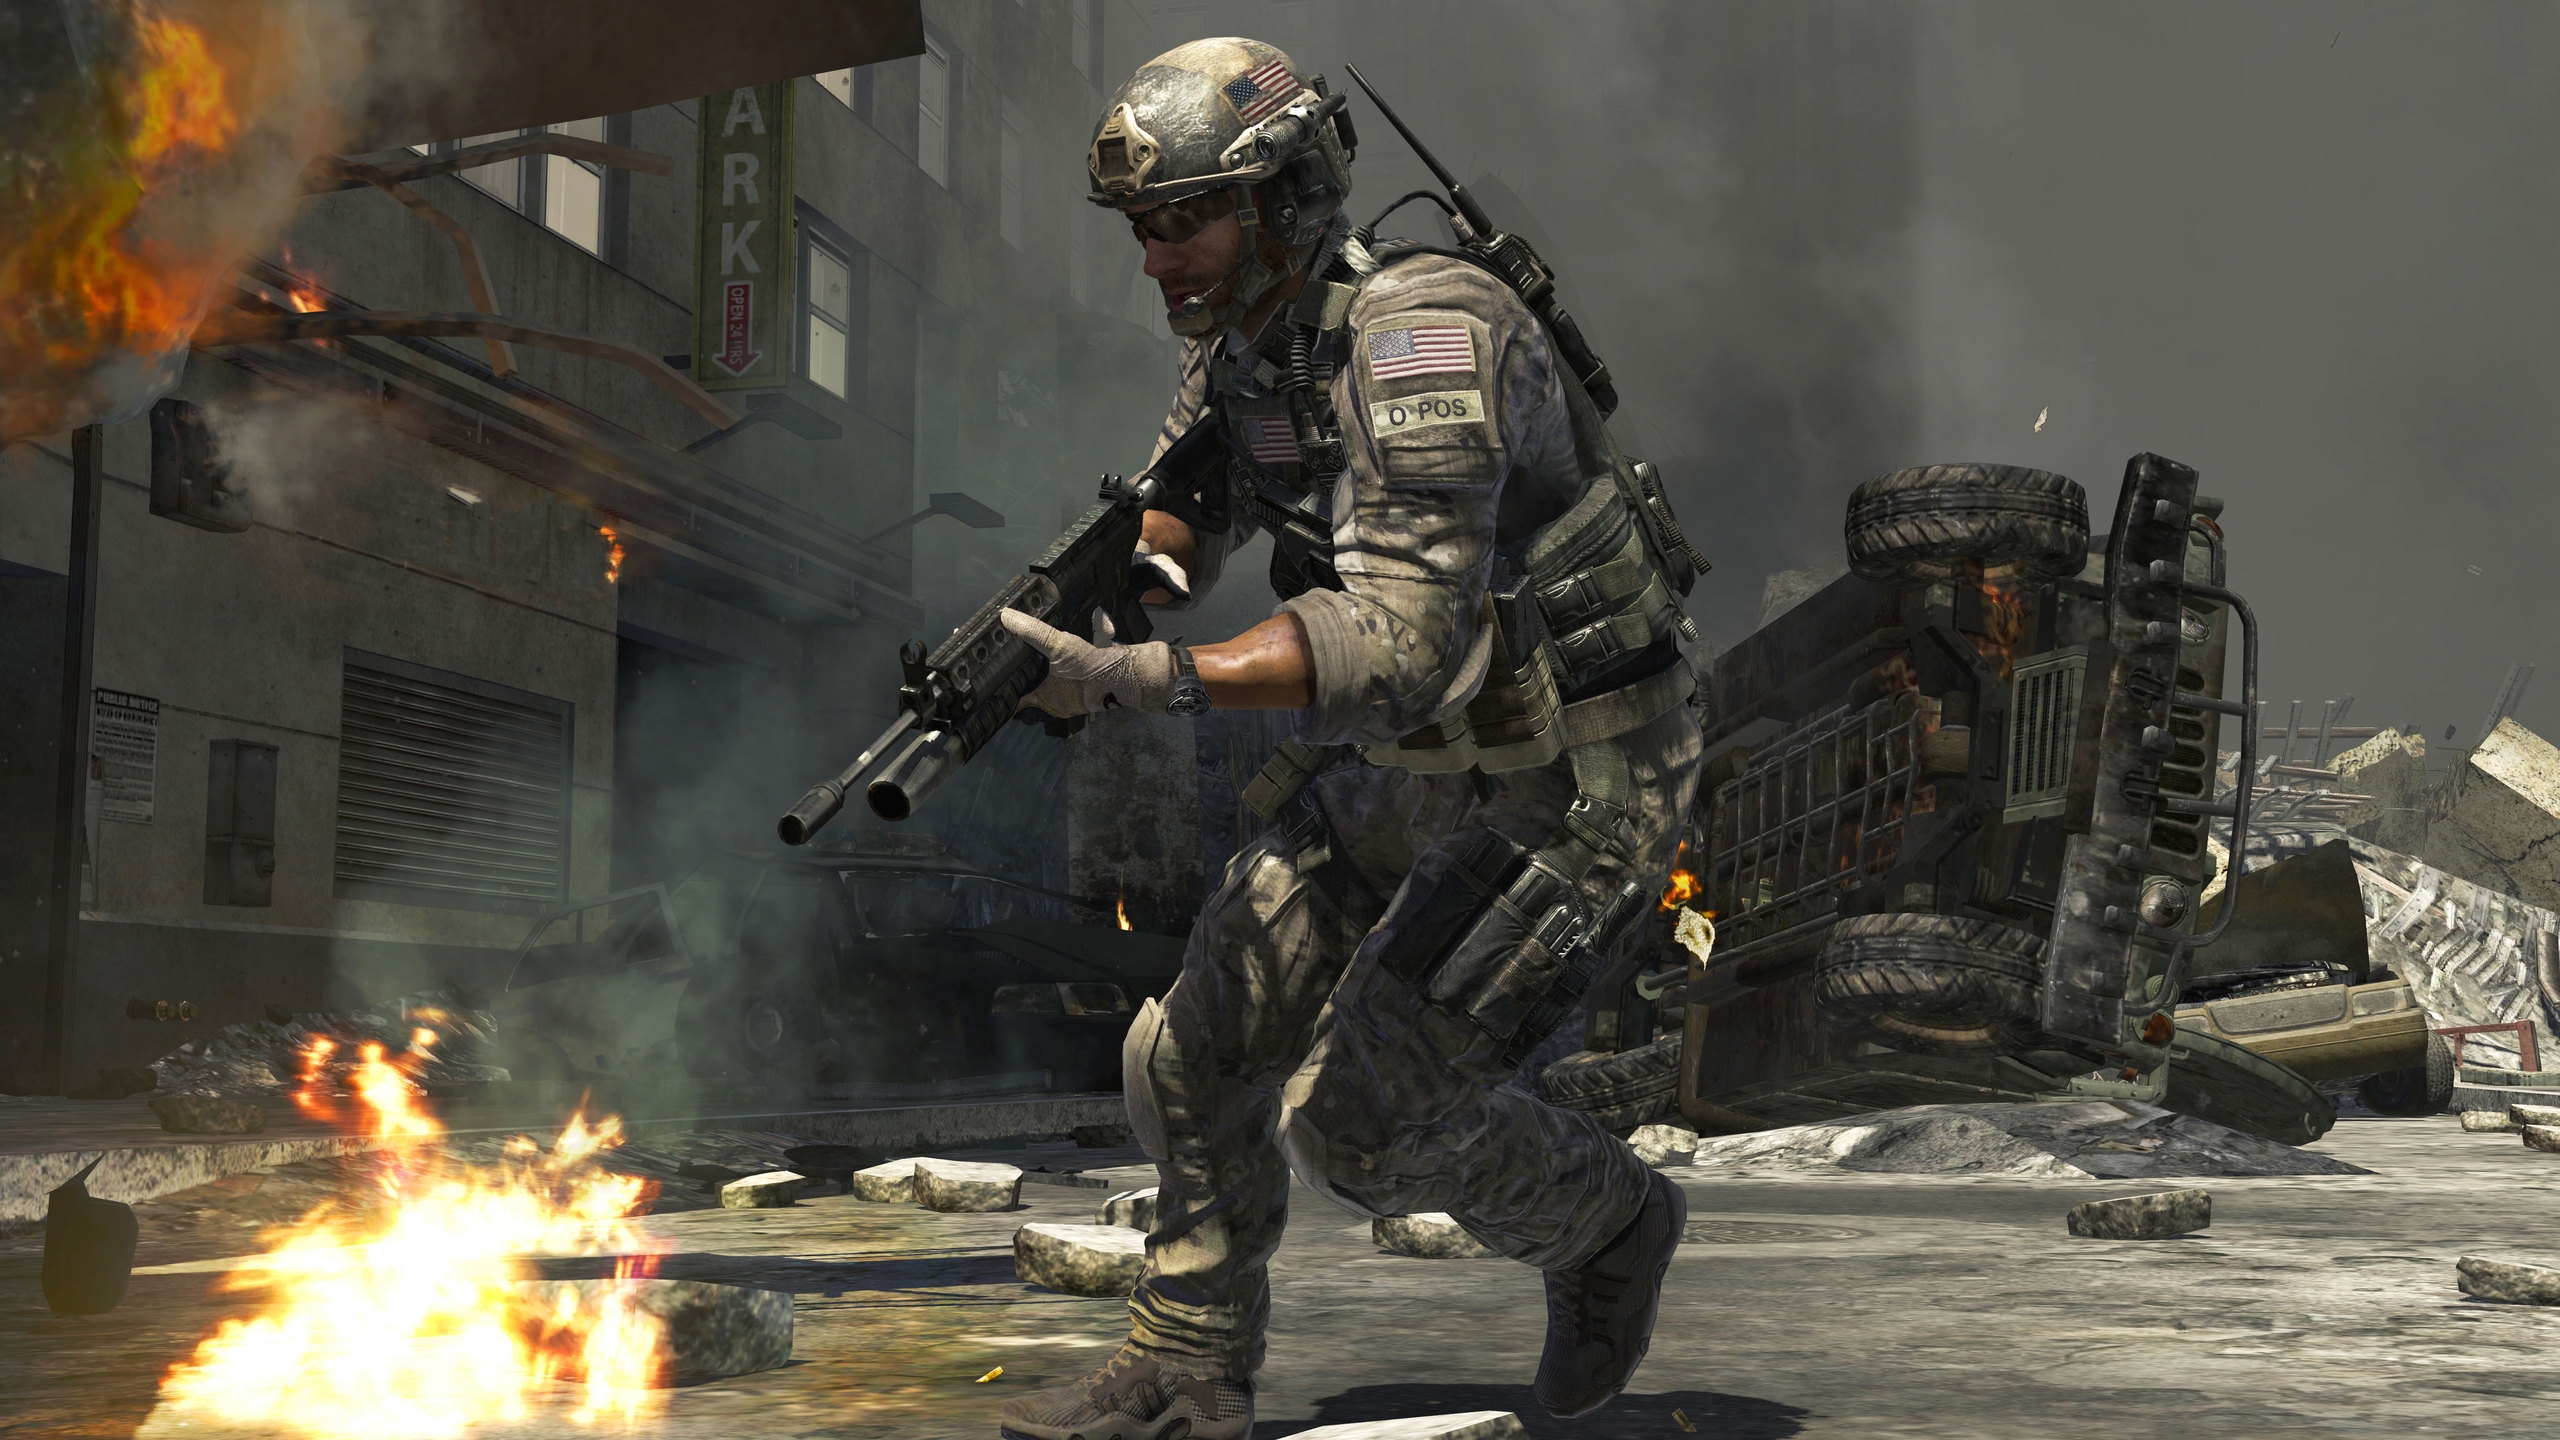 Call of Duty 3 Activision for 2560x1440 HDTV resolution